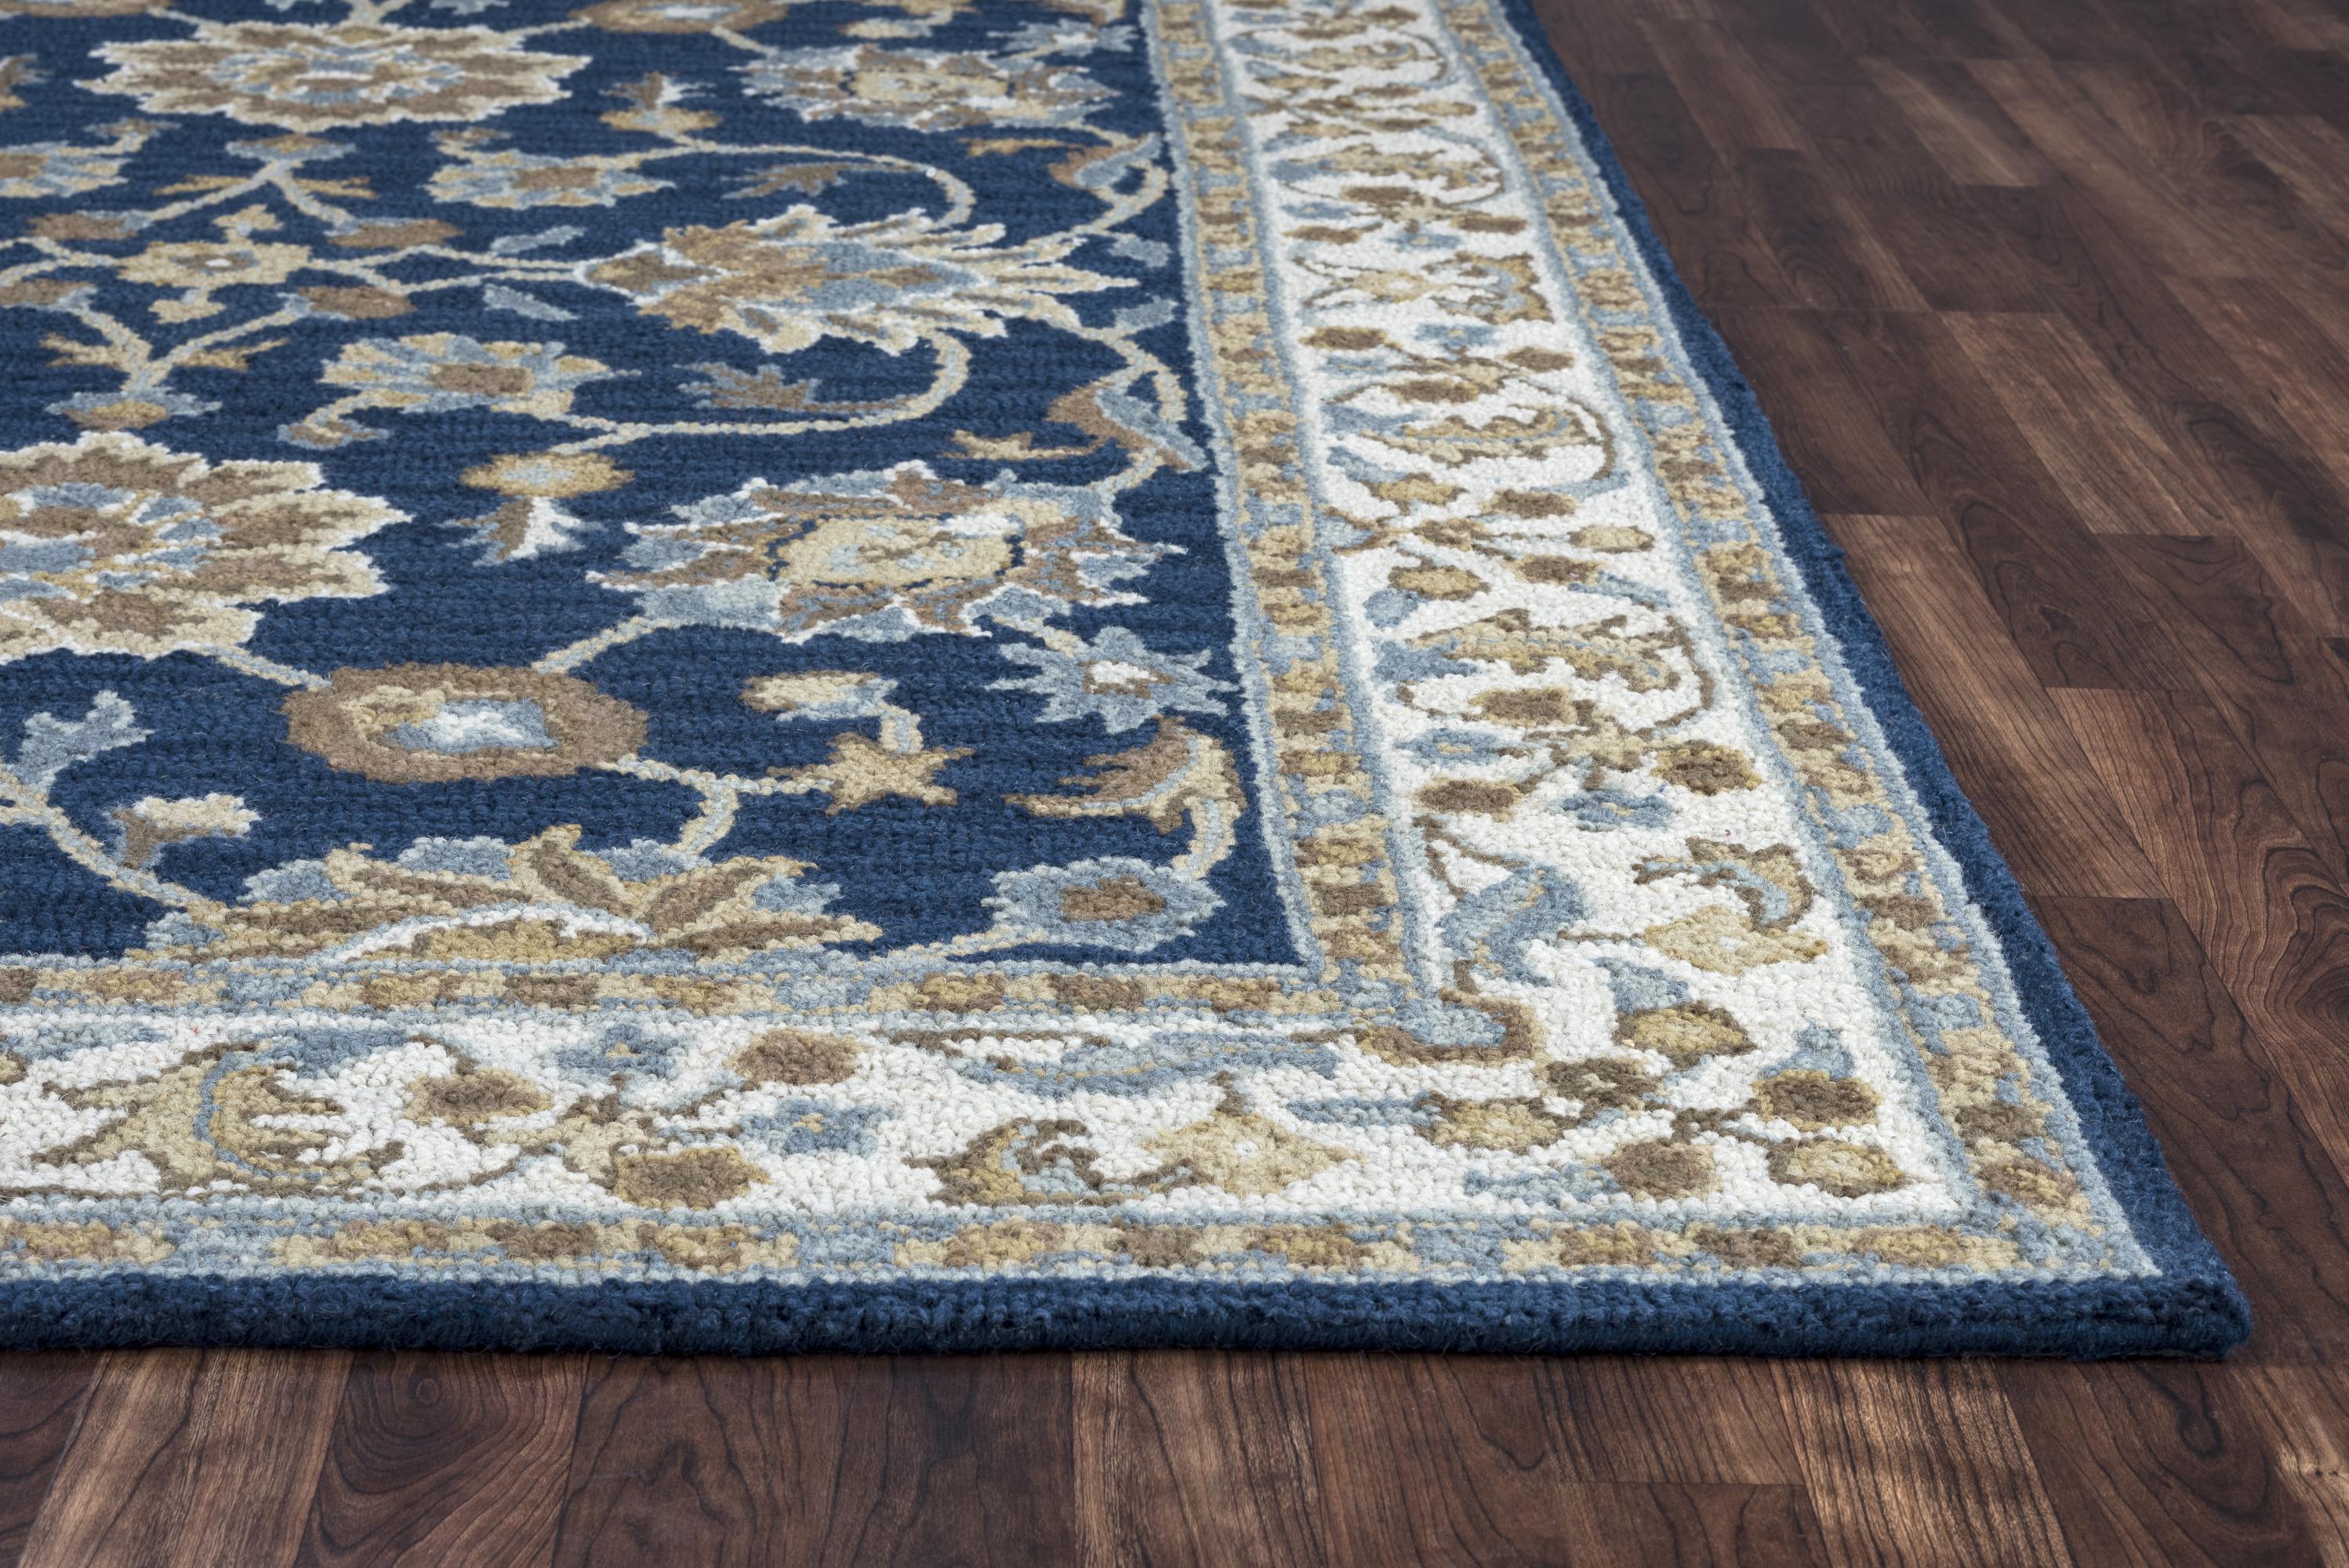 Rizzy Home AL2823 Blue 12' x 15' Hand-Tufted Area Rug - image 3 of 5